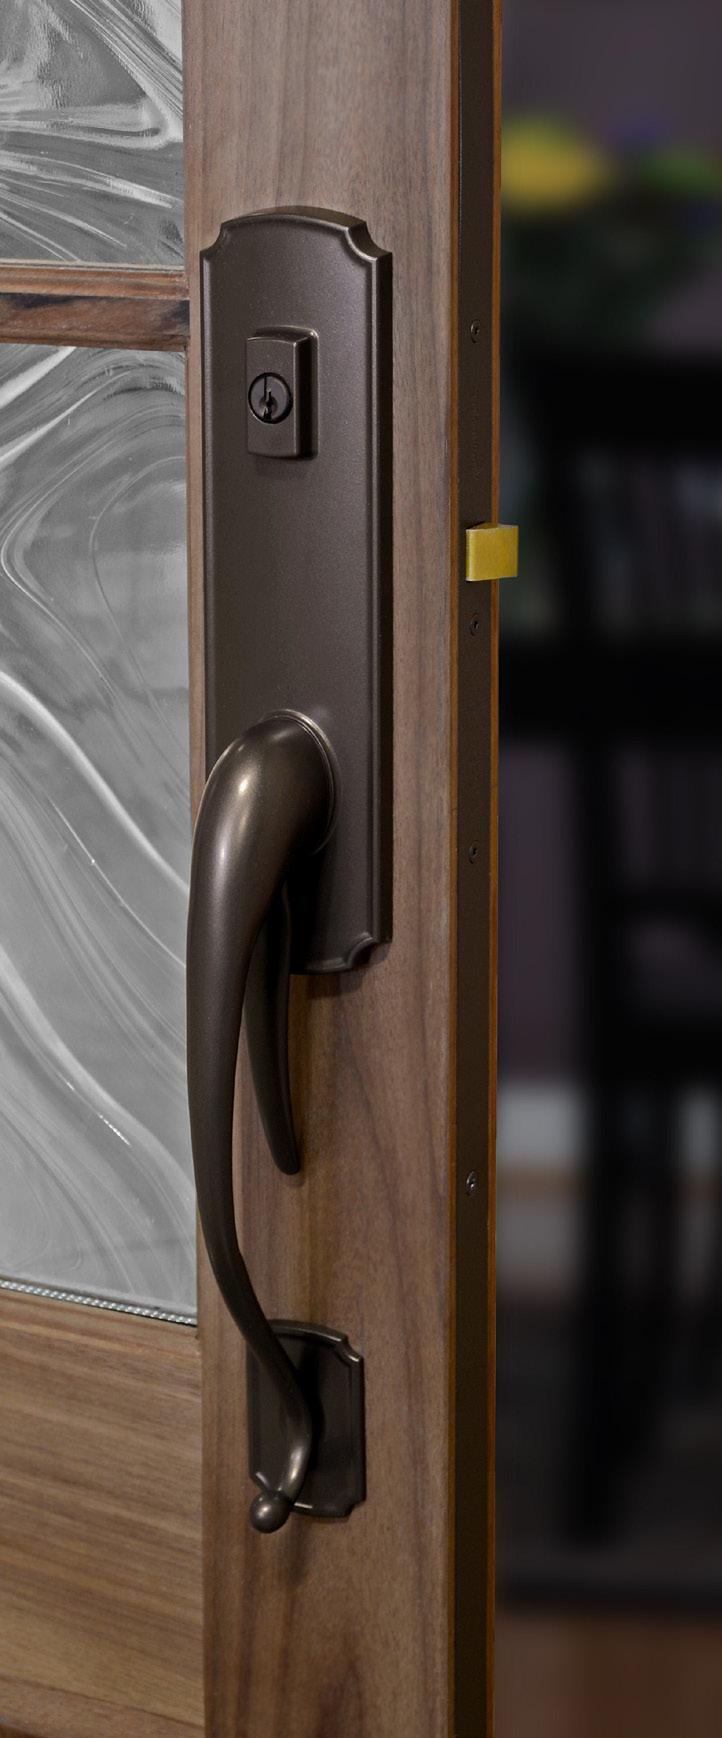 Pinnacle Entry Set SHOWN IN VICTORIAN BRONZE Re-key in seconds with SmartKey compatibility.